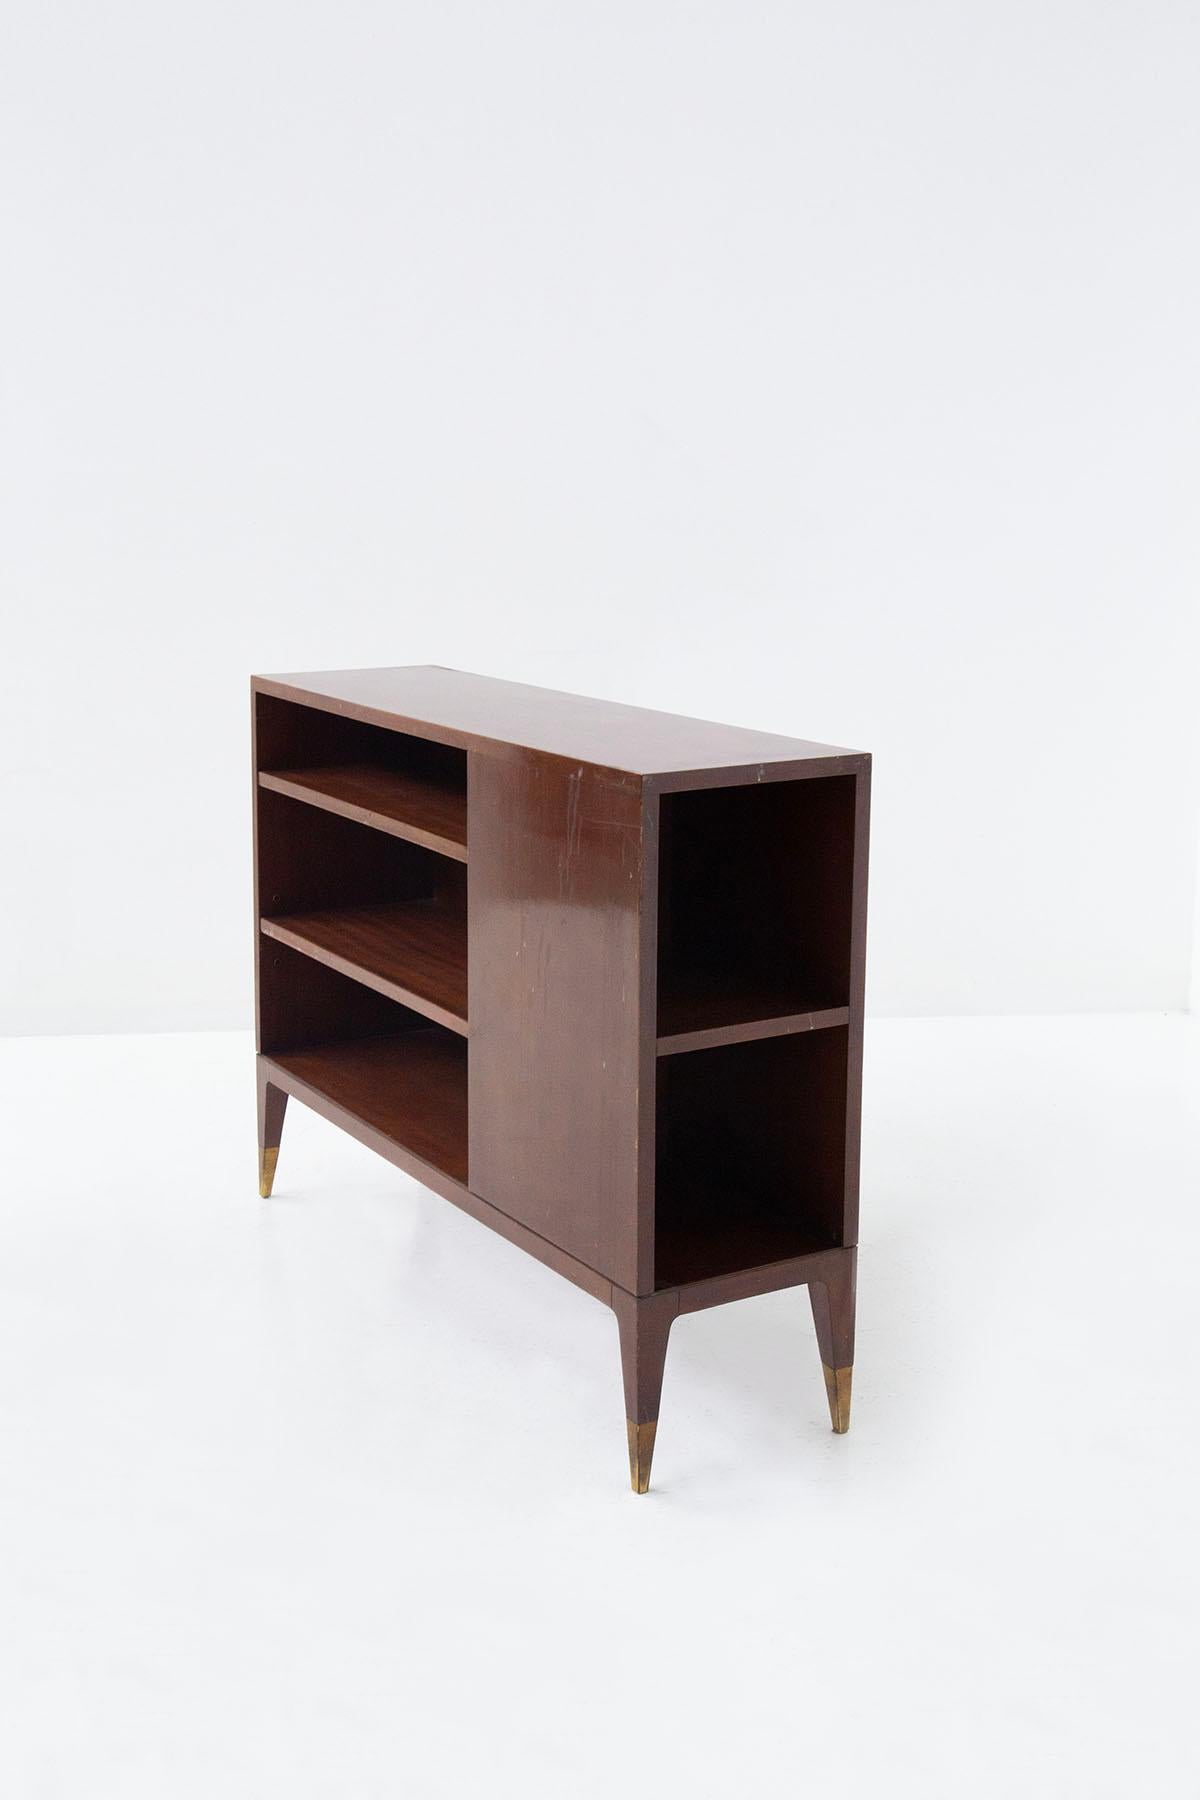 Elegant bookcase cabinet attributed to Gio Ponti from the 1950s.
The small bookcase can also serve as a piece of furniture through its small size. In fact it is multifunctional through its shelves inside it can serve as a small bookcase , or you